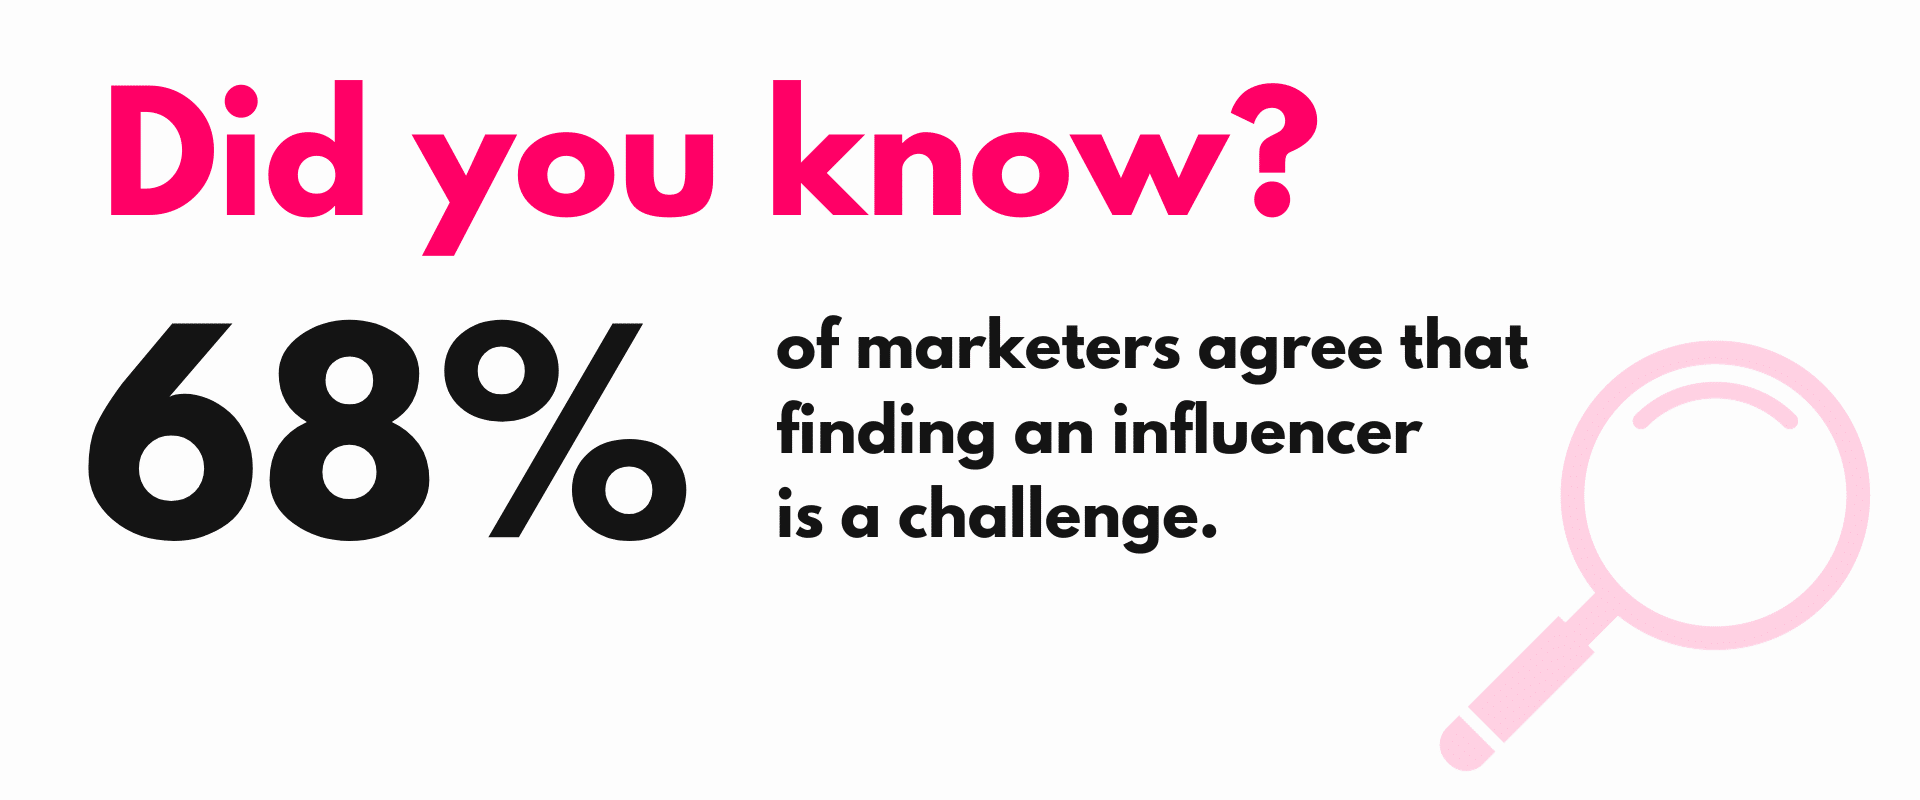 66% of marketers say finding influencers is a challenge.